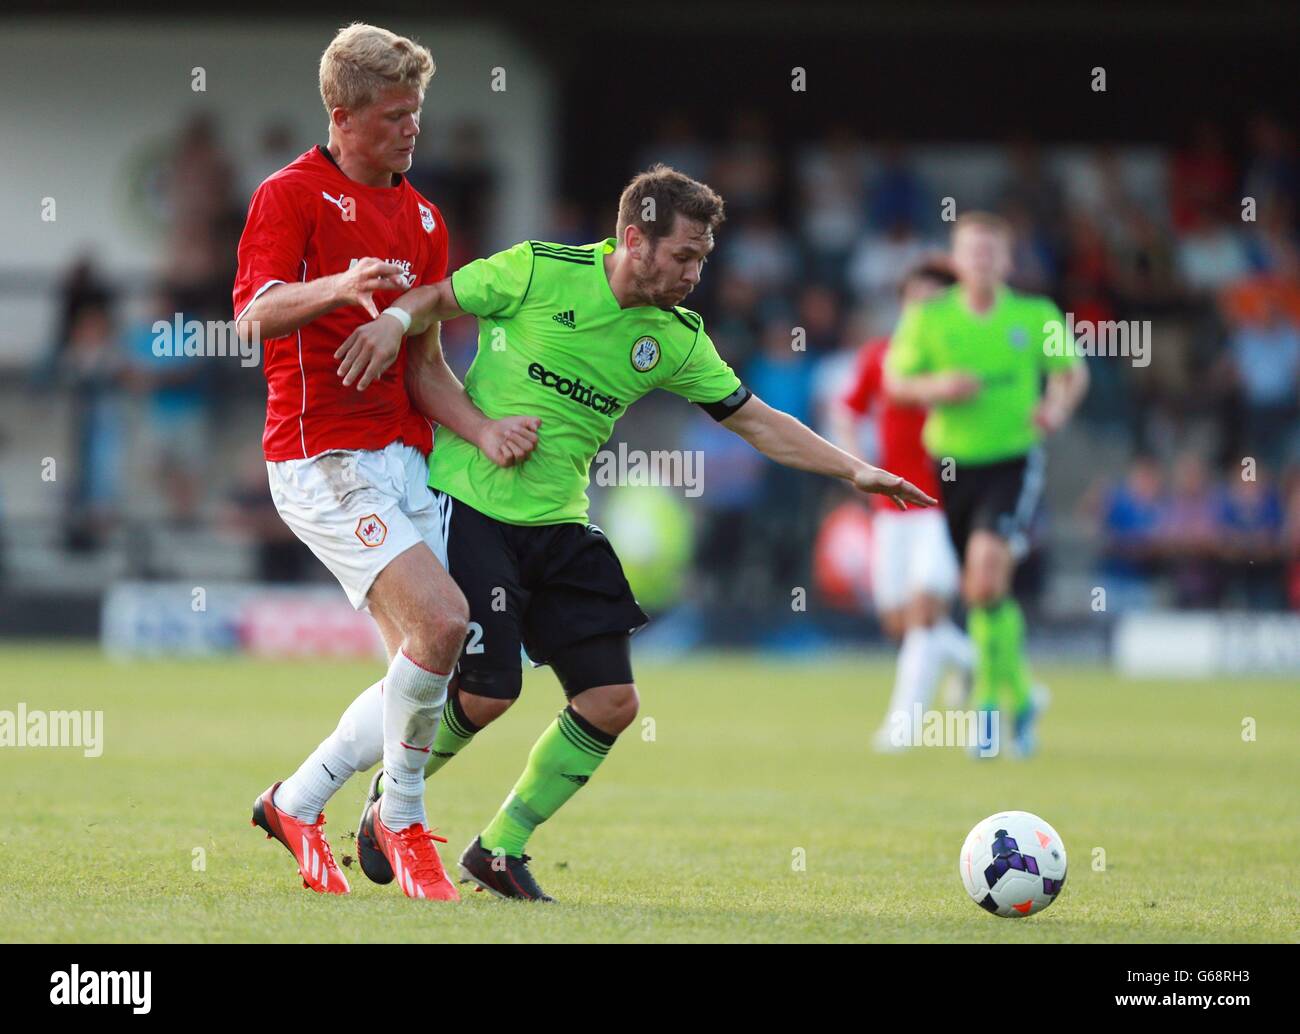 Soccer - Pre-Season Friendly - Forest Green Rovers v Cardff City - The New Lawn. Cardiff City's Alexander Cornelius challenges Forest Green Rovers Jared Hodgkiss during the pre-season friendly at The New Lawn, Nailsworth. Stock Photo